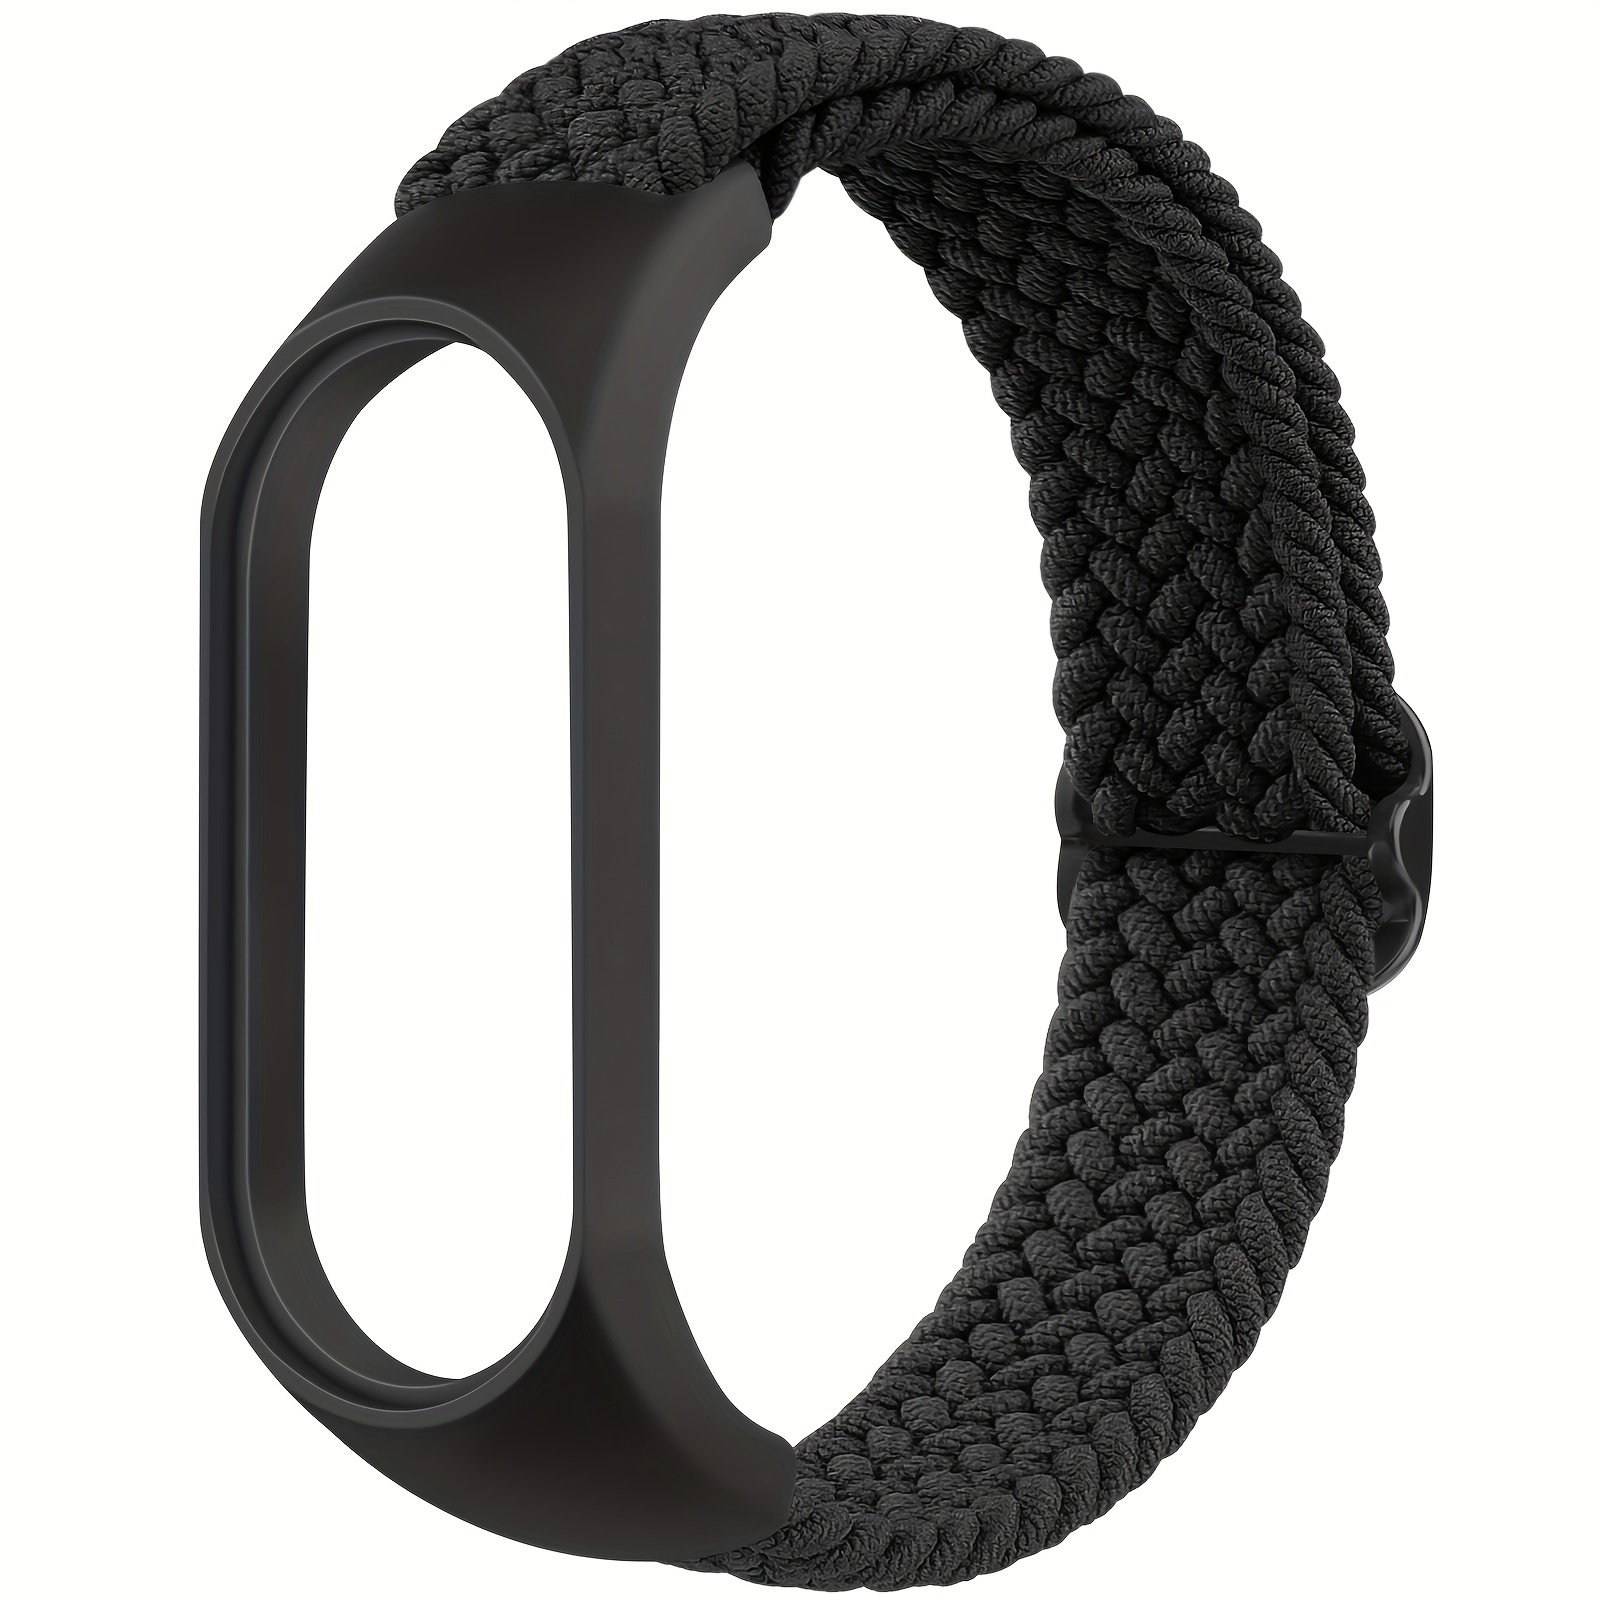 

Adjustable Braided Nylon Watchband For Xiaomi /6/5/4/3 & Amazfit Band 5 - Elastic Replacement Wristband With Secure Clasp